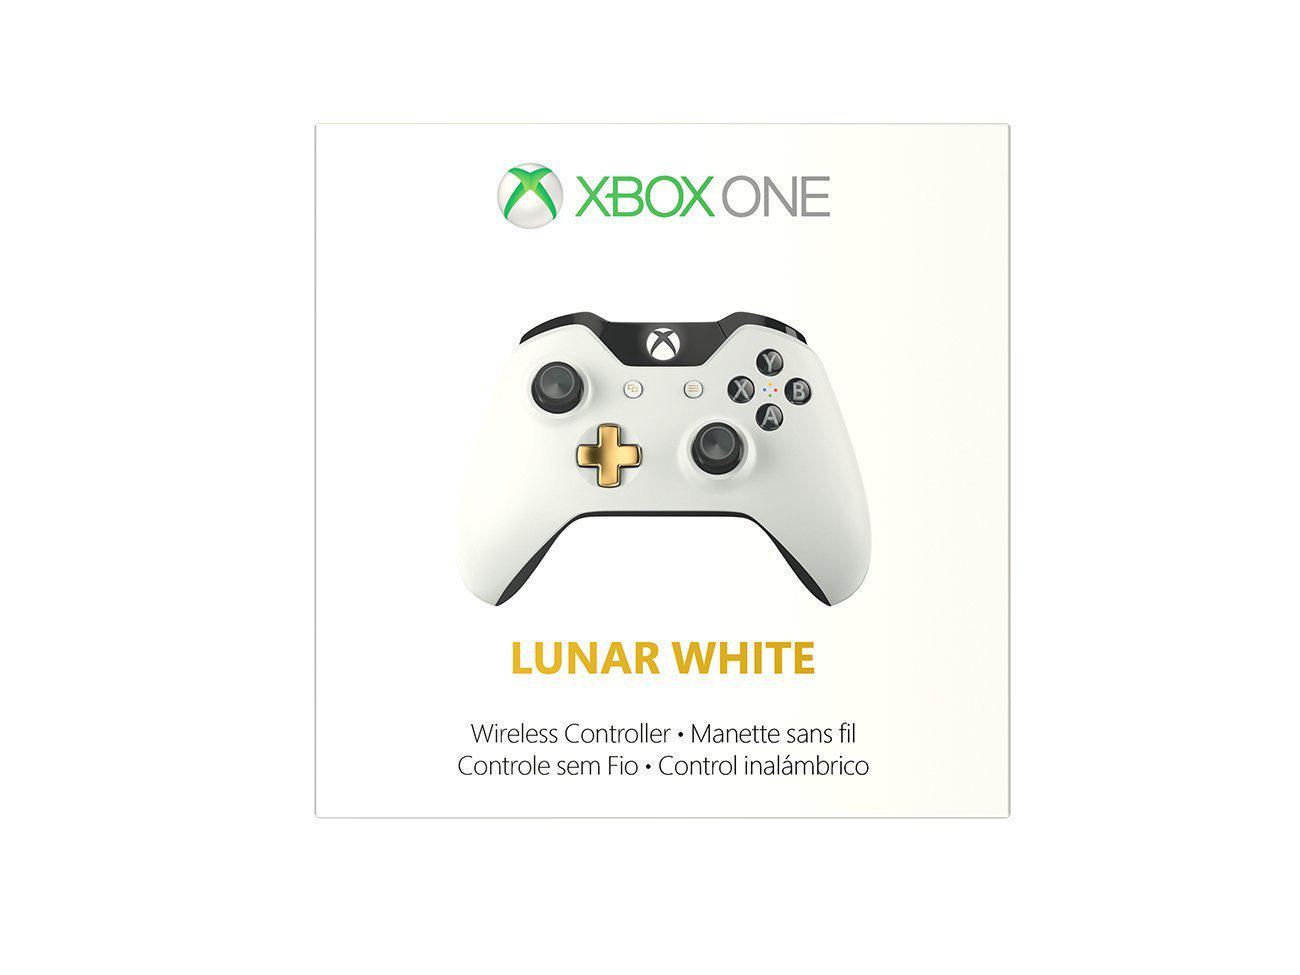 xbox one special edition lunar white wireless controller